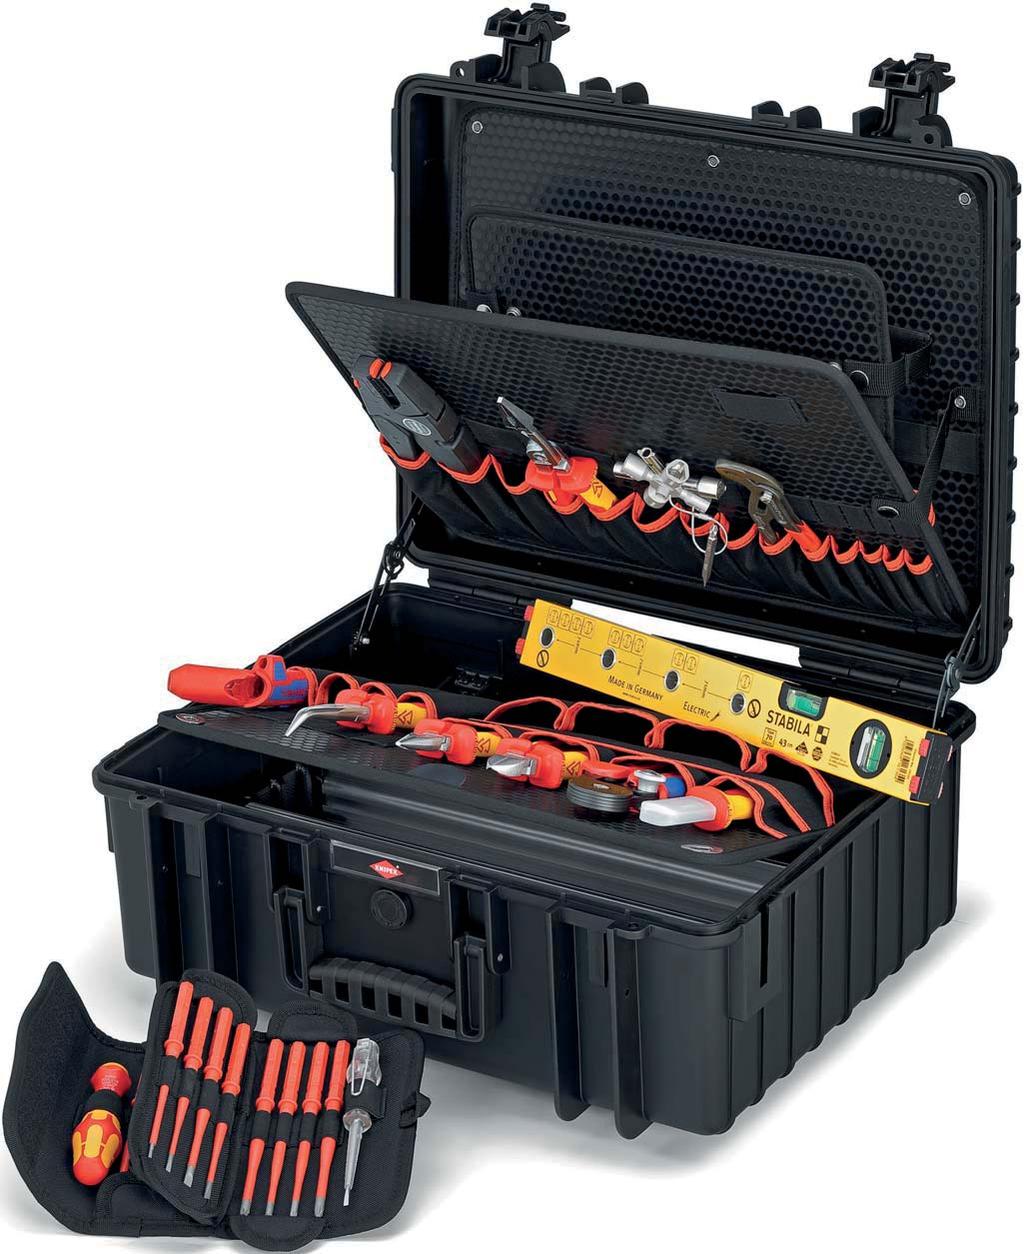 Tool Case Robust34 Electric 26 parts For the touhest operatin conditions: dust-tiht, waterproof and temperature resistant Filled with 26 branded tools for professional electricians > Fit to fly case,